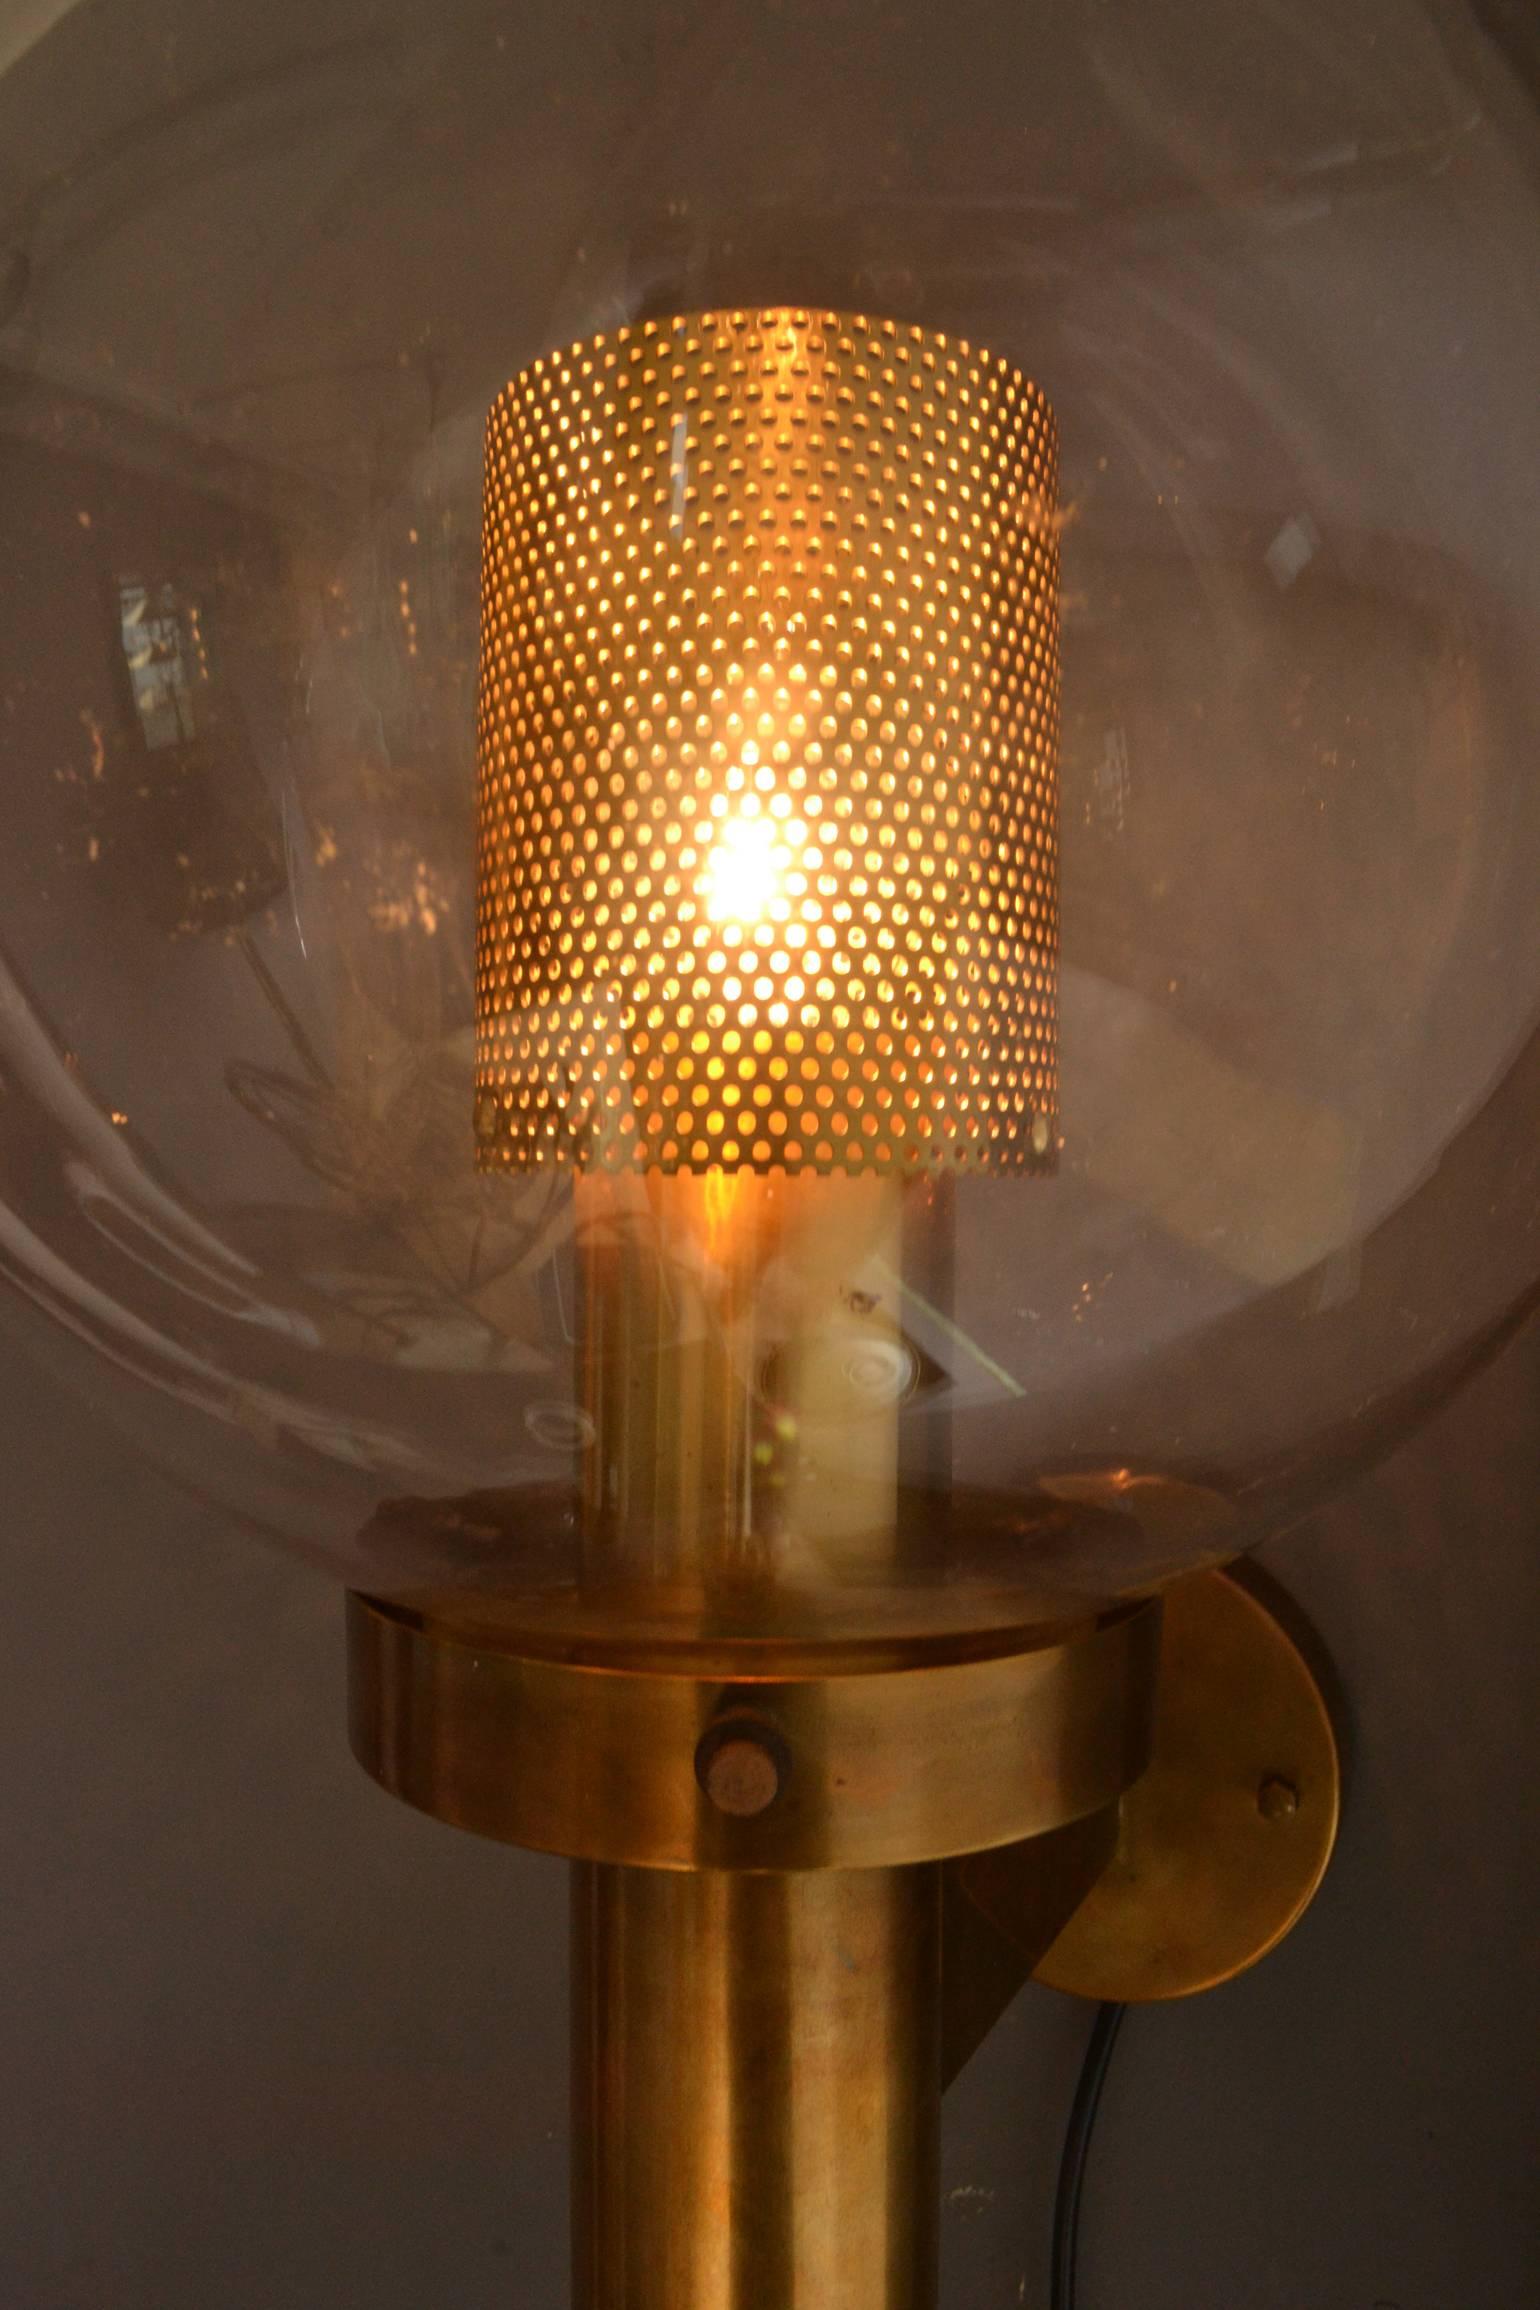 Swedish Pair of Brass and Glass Perforated Sconces by Hans-Agne Jakobsson for Markaryd